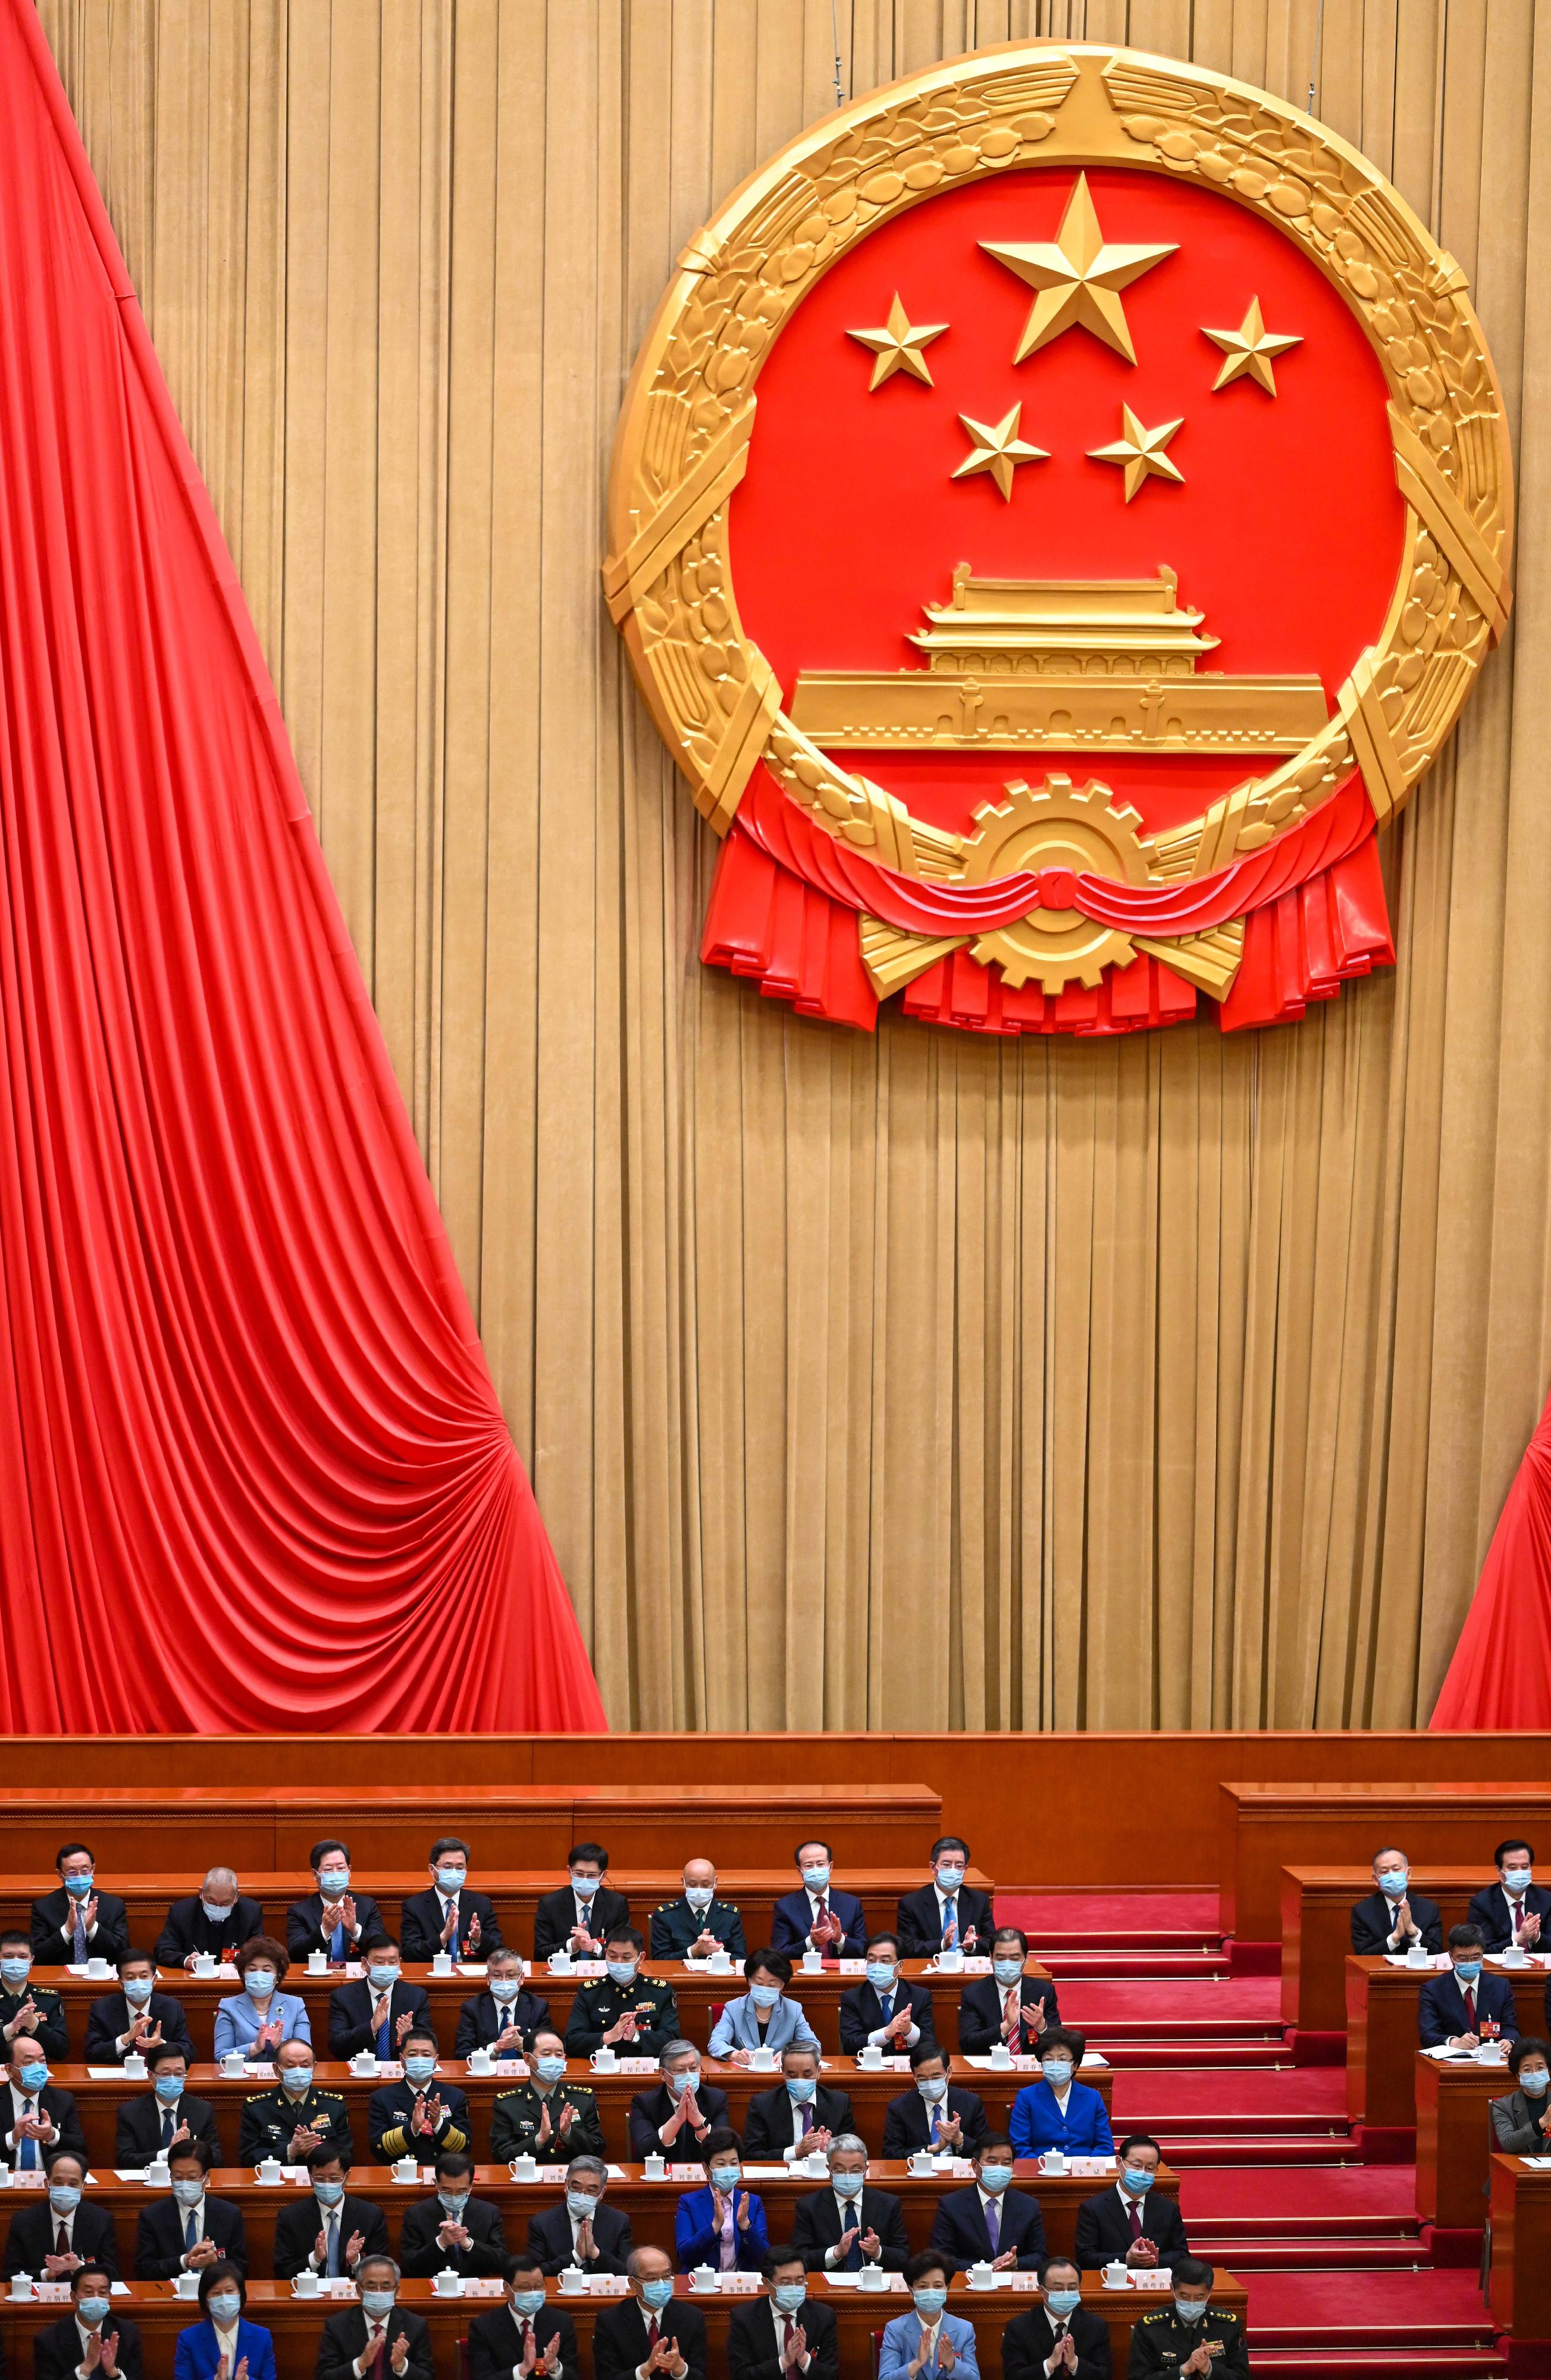 The Chief Executive, Mr John Lee (third row, second left), attends the closing meeting of the first session of the 14th National People's Congress in Beijing this morning (March 13).